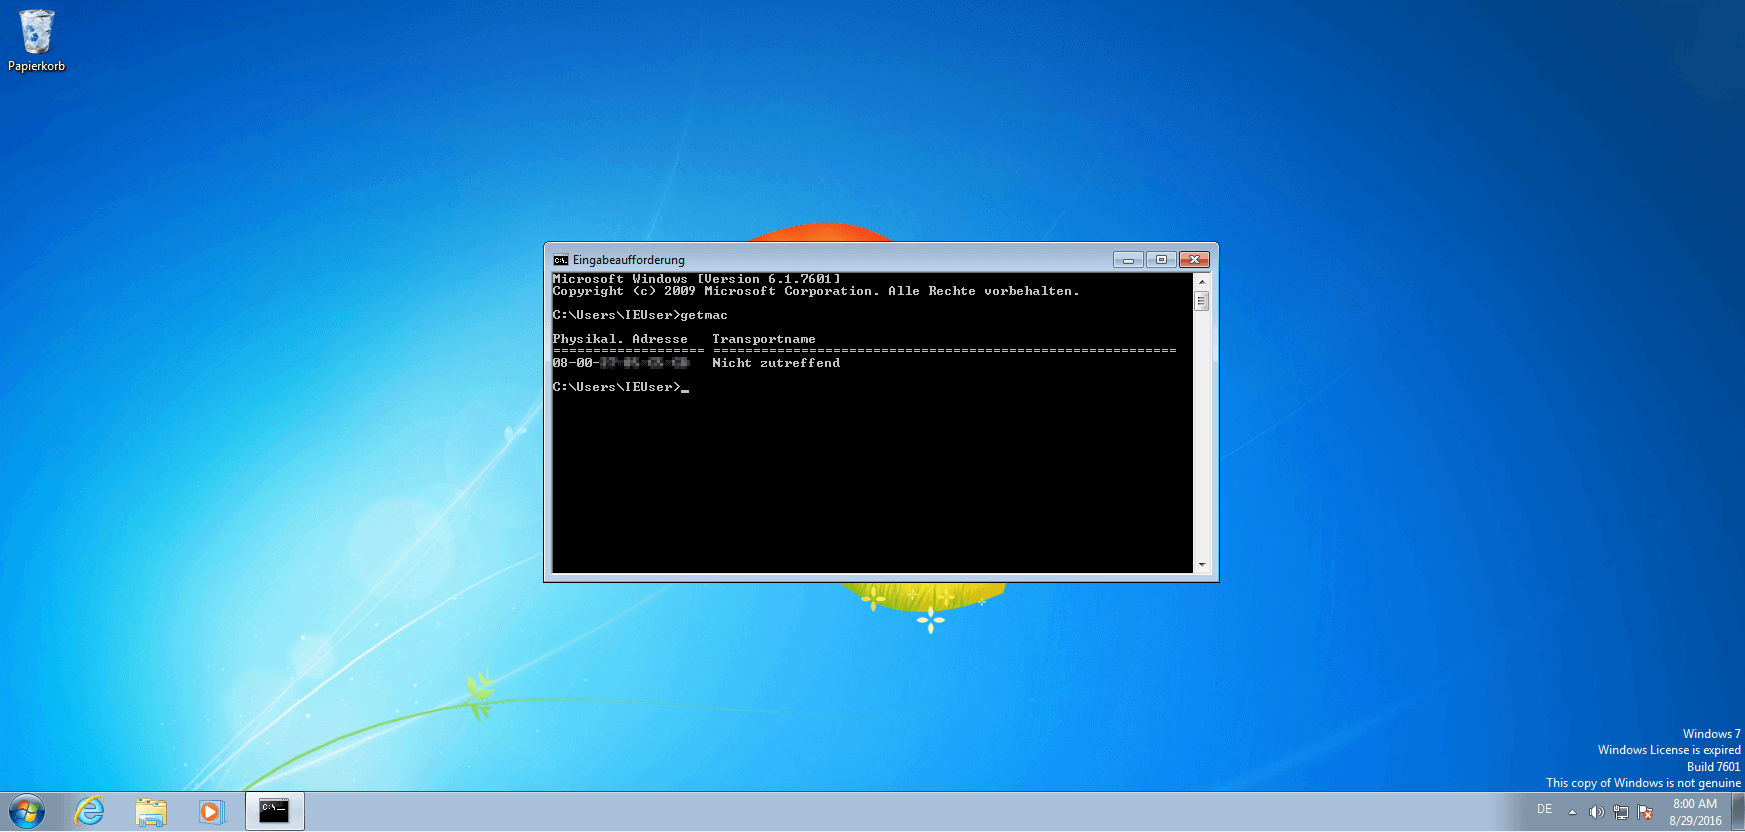 The command “getmac” displays the hardware address of the network card